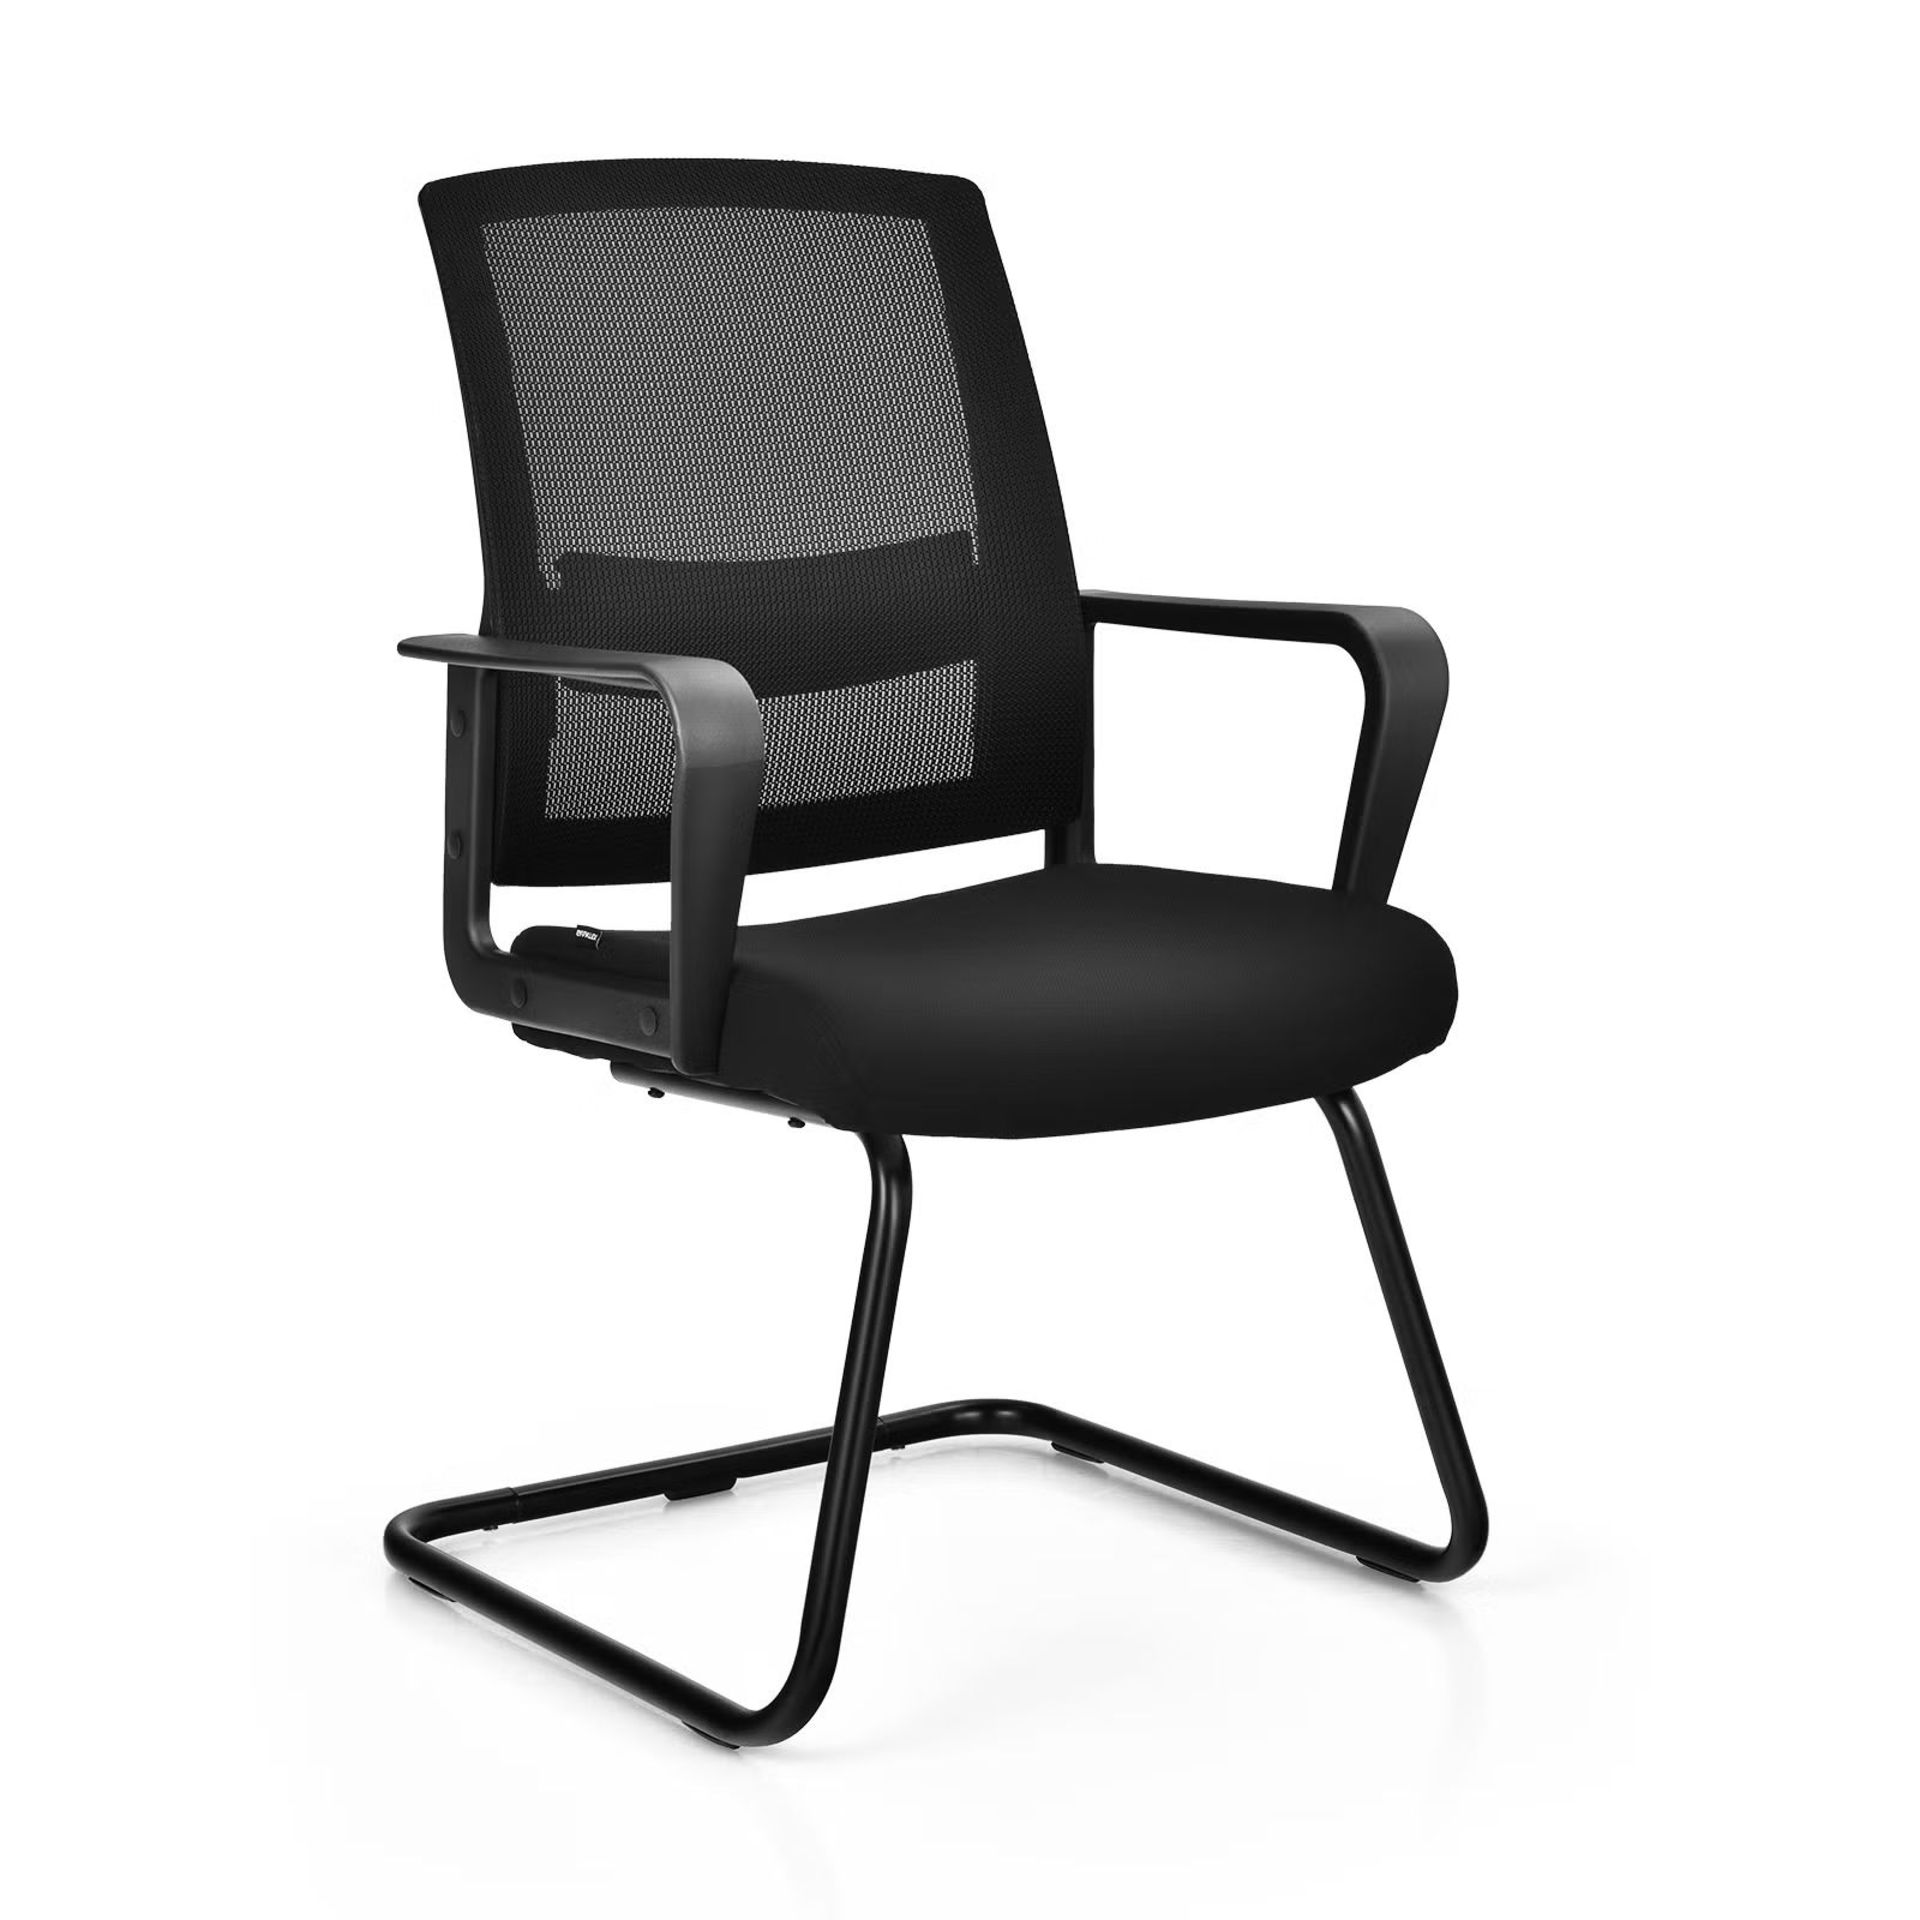 Mid Mesh Back Reception Chair with Adjustable Lumbar Support and Sled Base-Black. -R14.11.